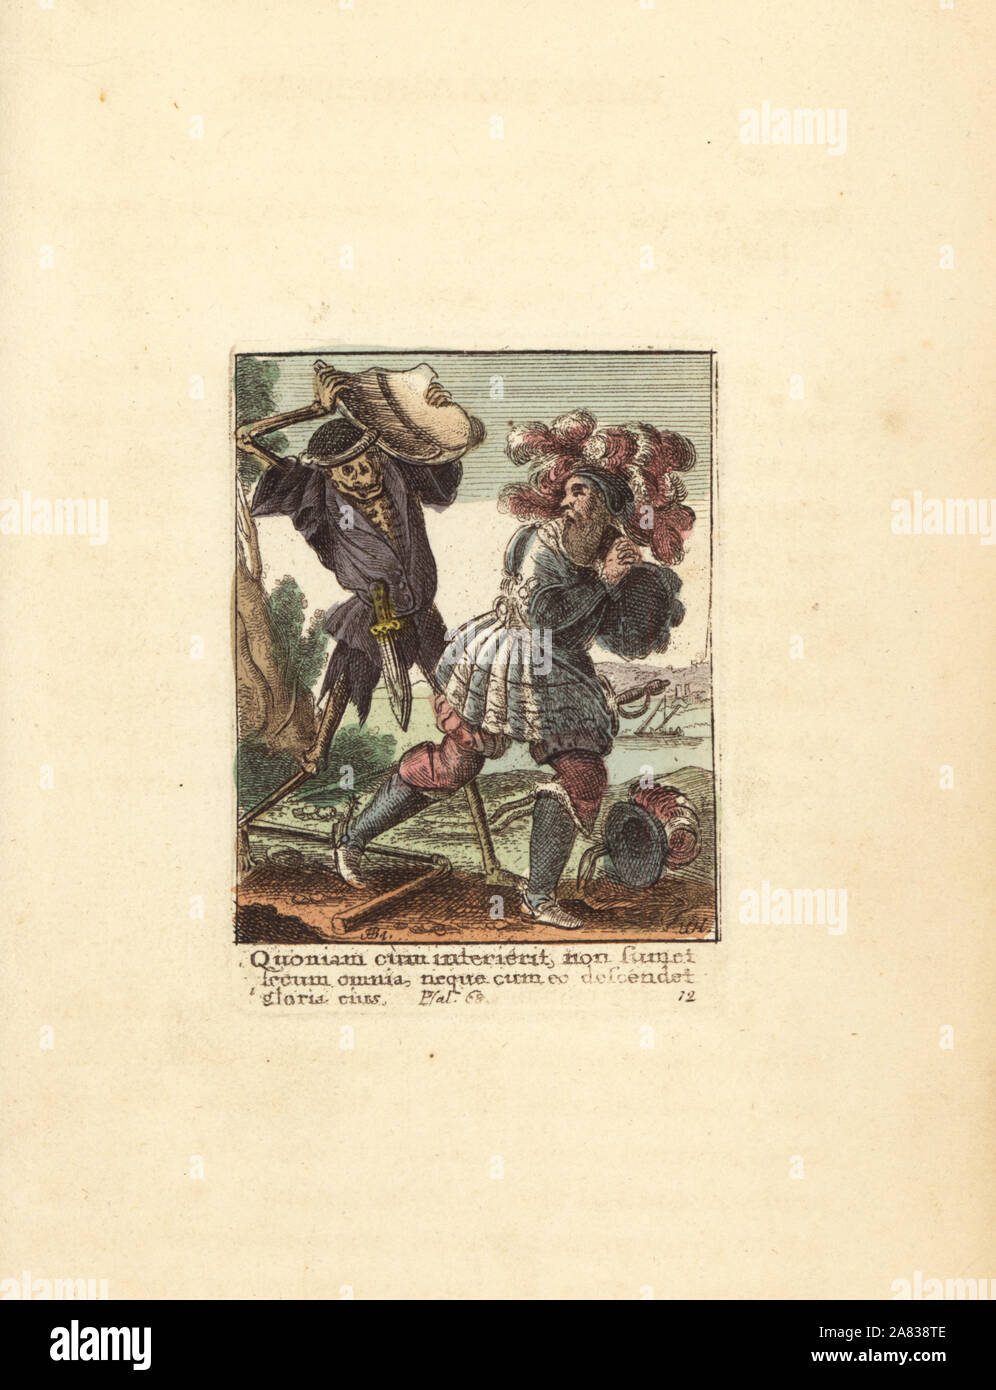 Skeleton of Death killing a Count with his own escutcheon. On the ground is his helmet and a flail, symbol of his oppressed vassals. Handcoloured copperplate engraving by Wenceslaus Hollar from The Dance of Death by Hans Holbein, Coxhead, London, 1816. Stock Photo